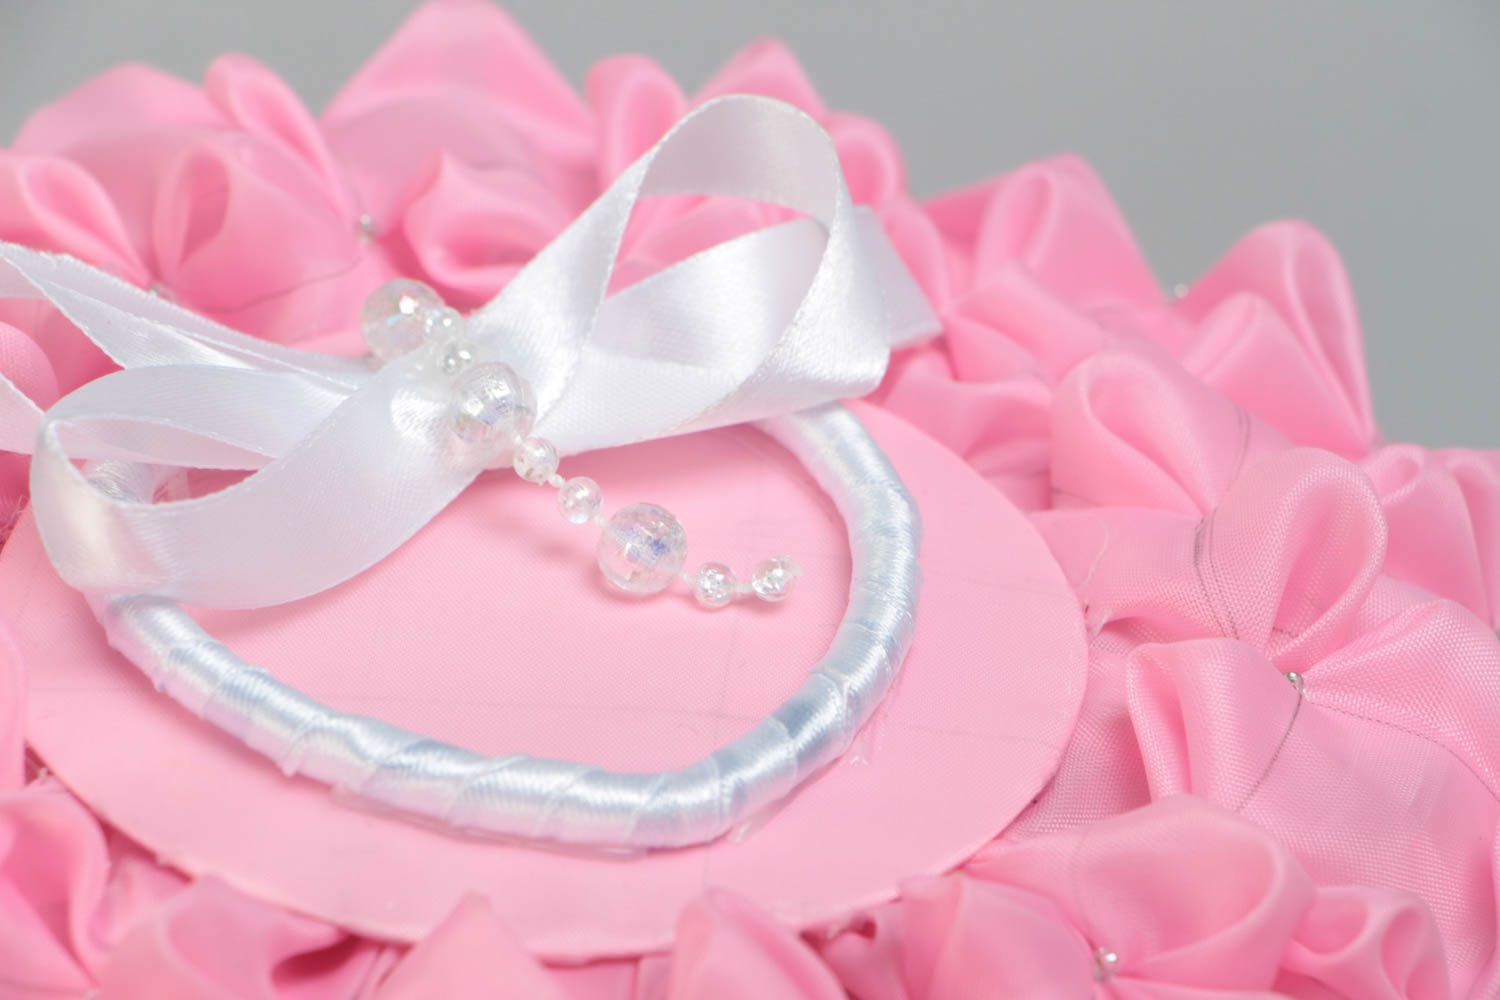 Handmade pink satin ring pillow with white bow designer wedding accessory photo 3